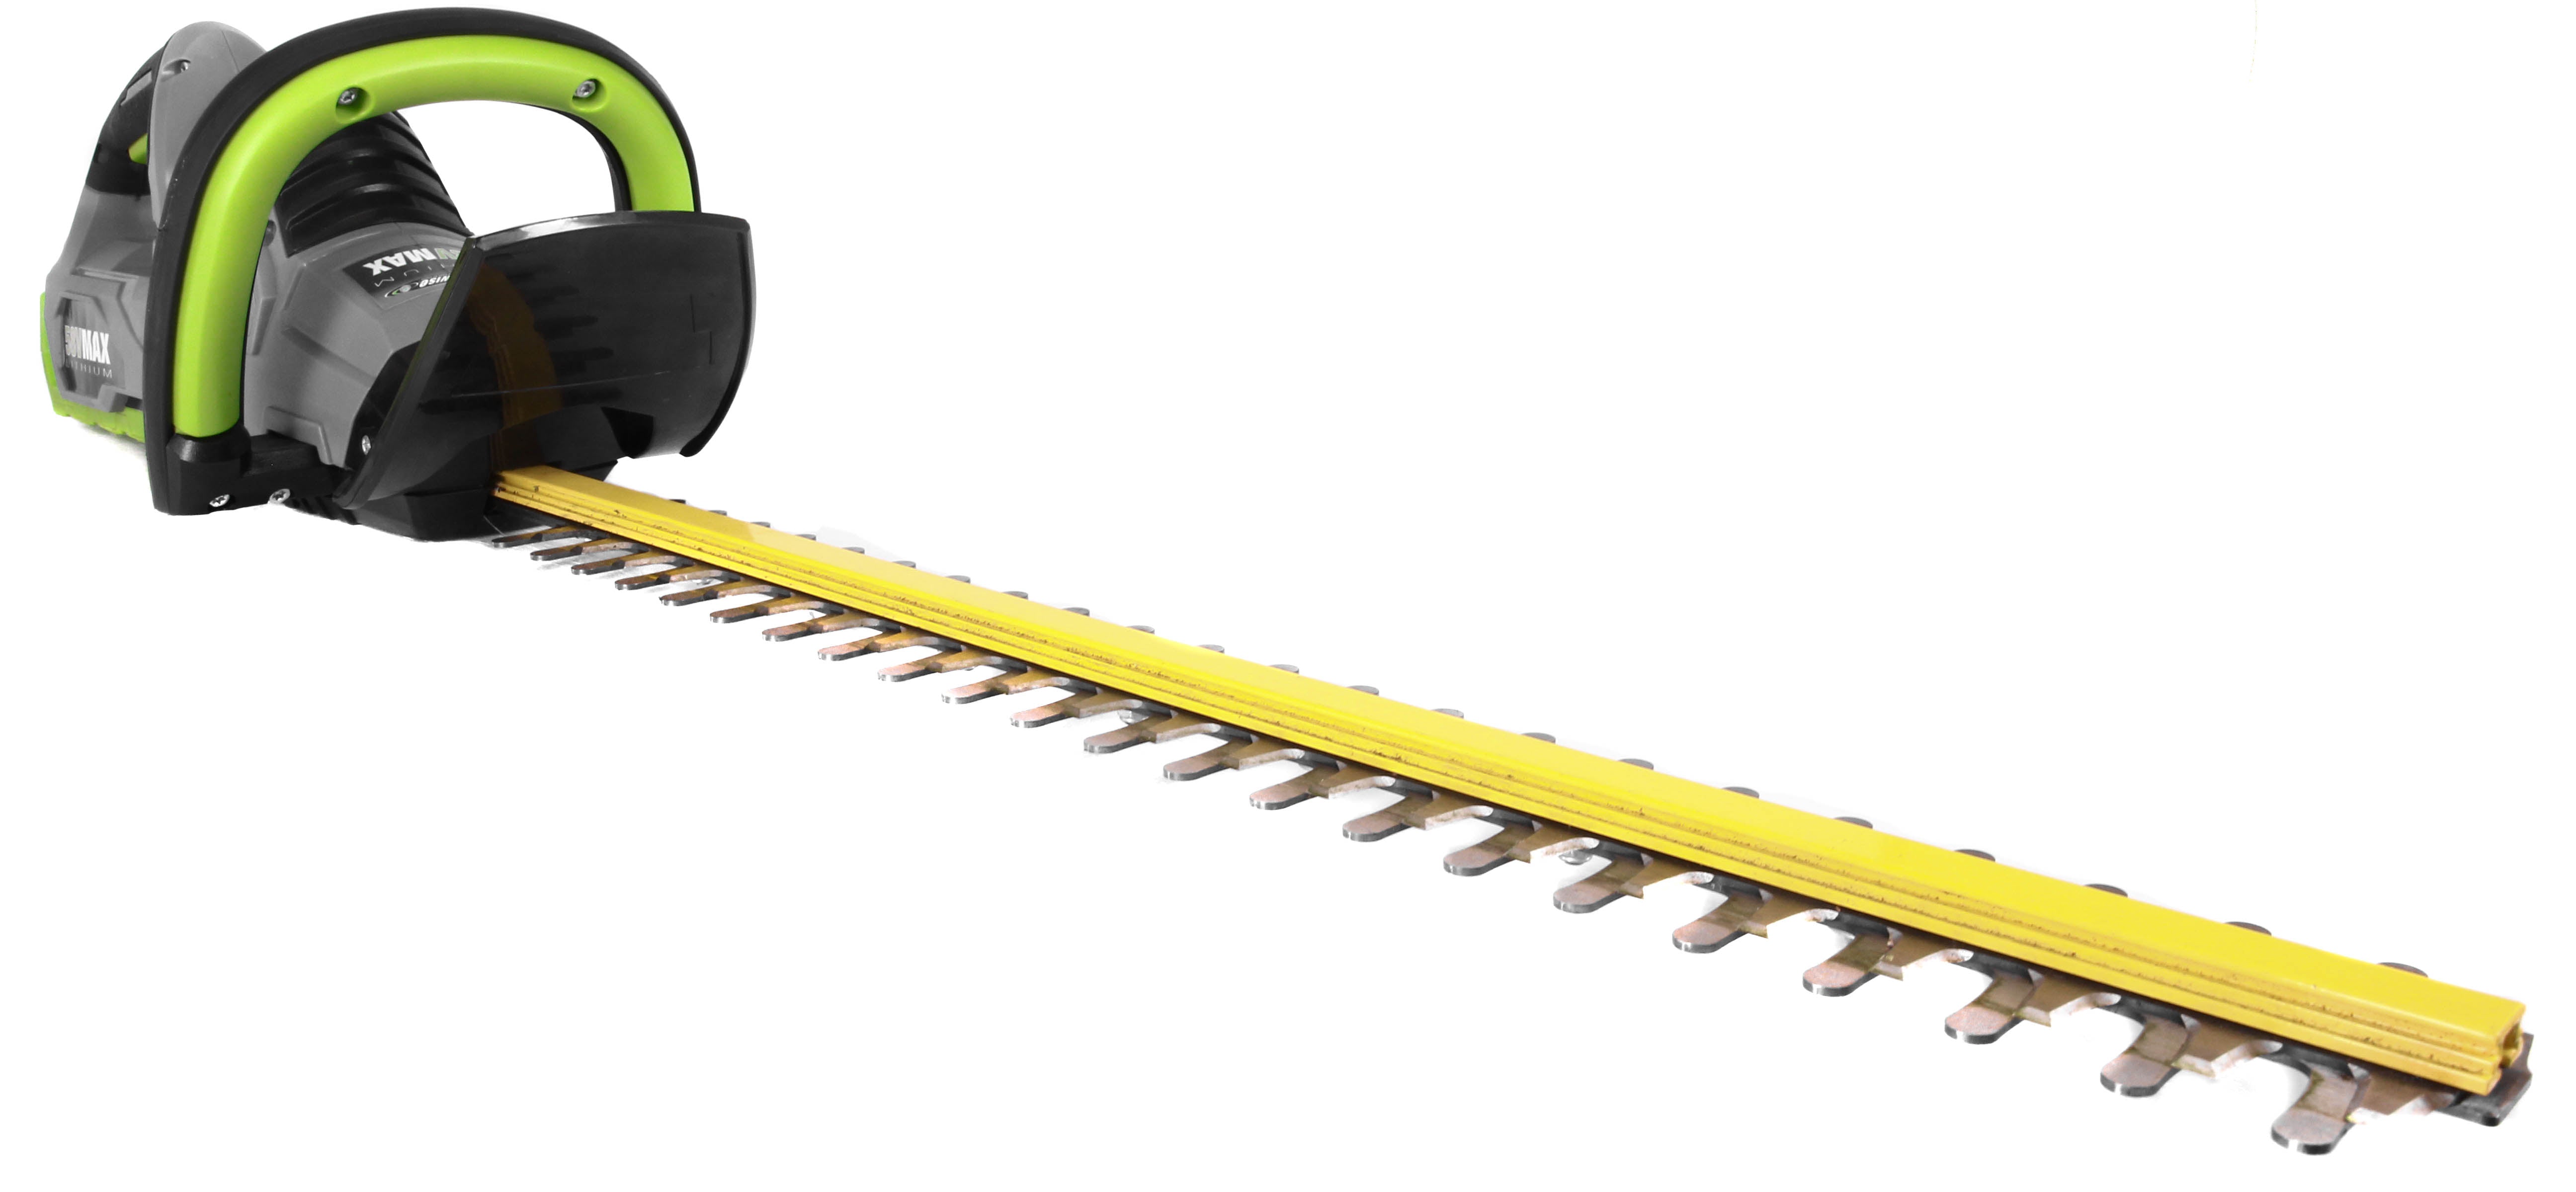 Earthwise Power Tools by ALM 24" 58V 2Ah Lithium Hedge Trimmer